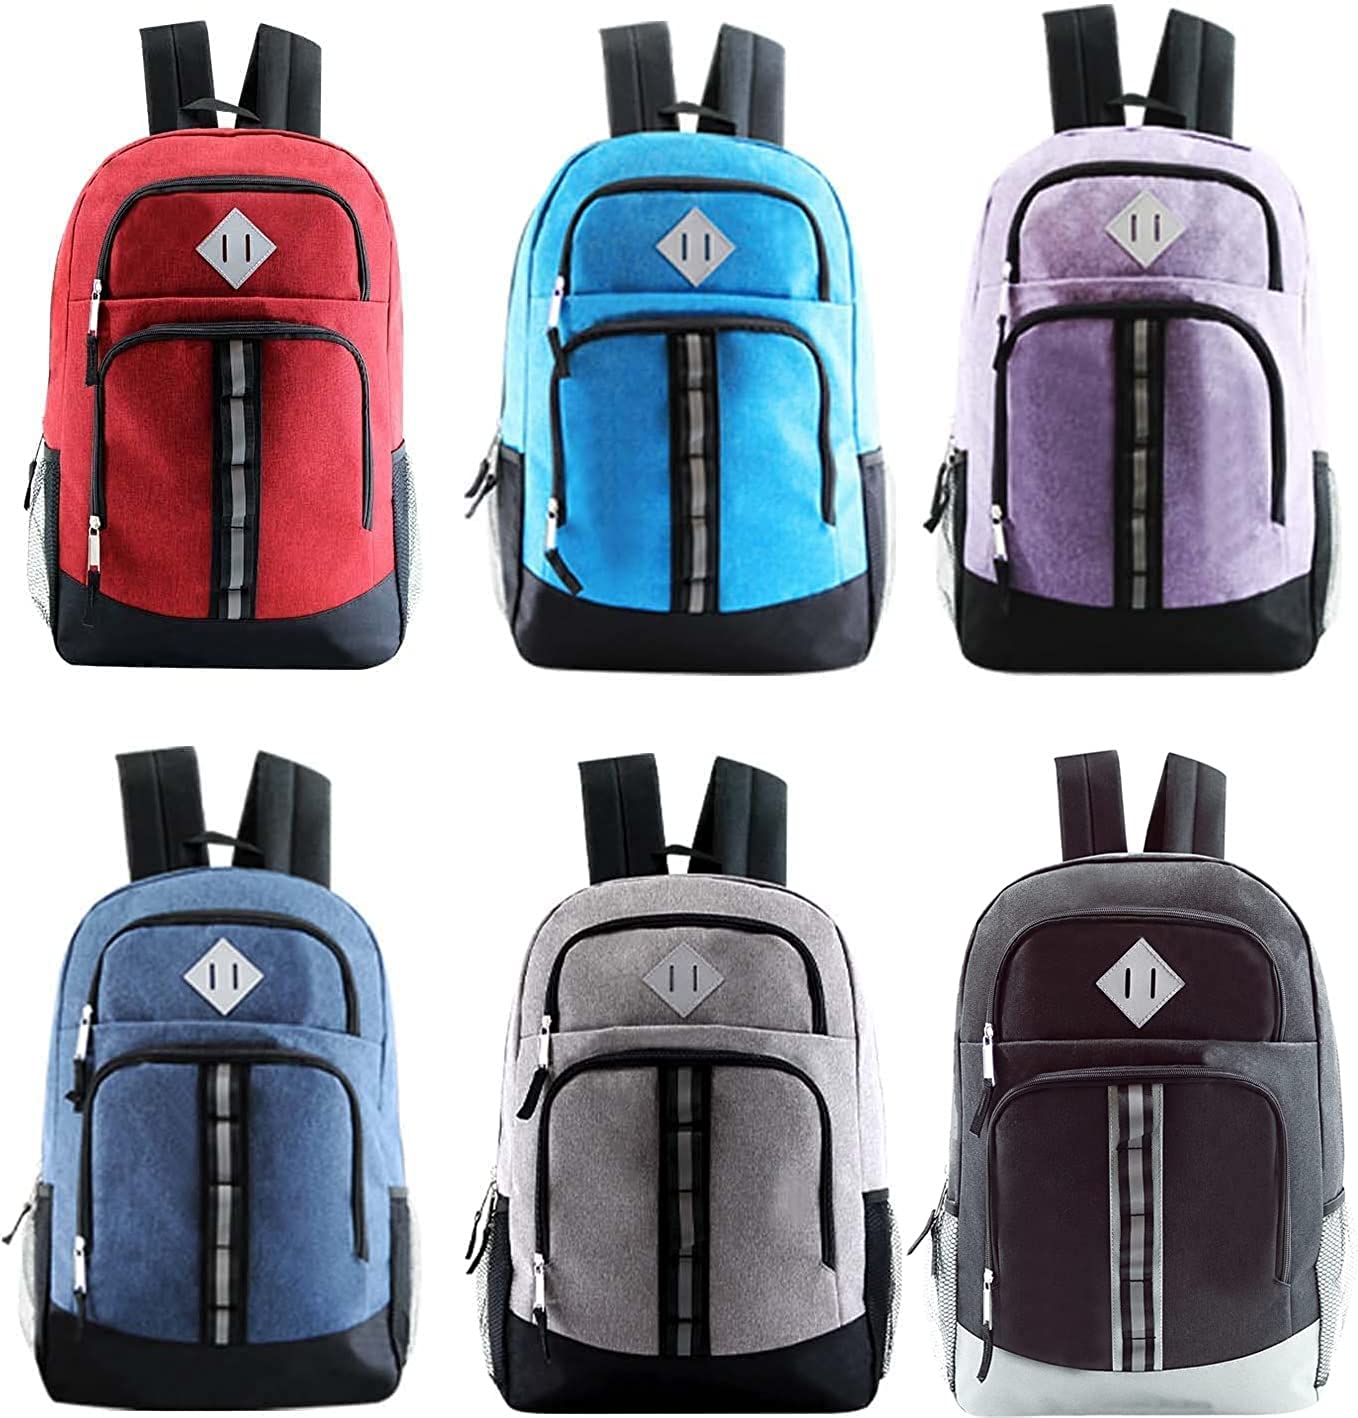 18" Deluxe Wholesale Backpack in 6 Colors - Bulk Case of 24